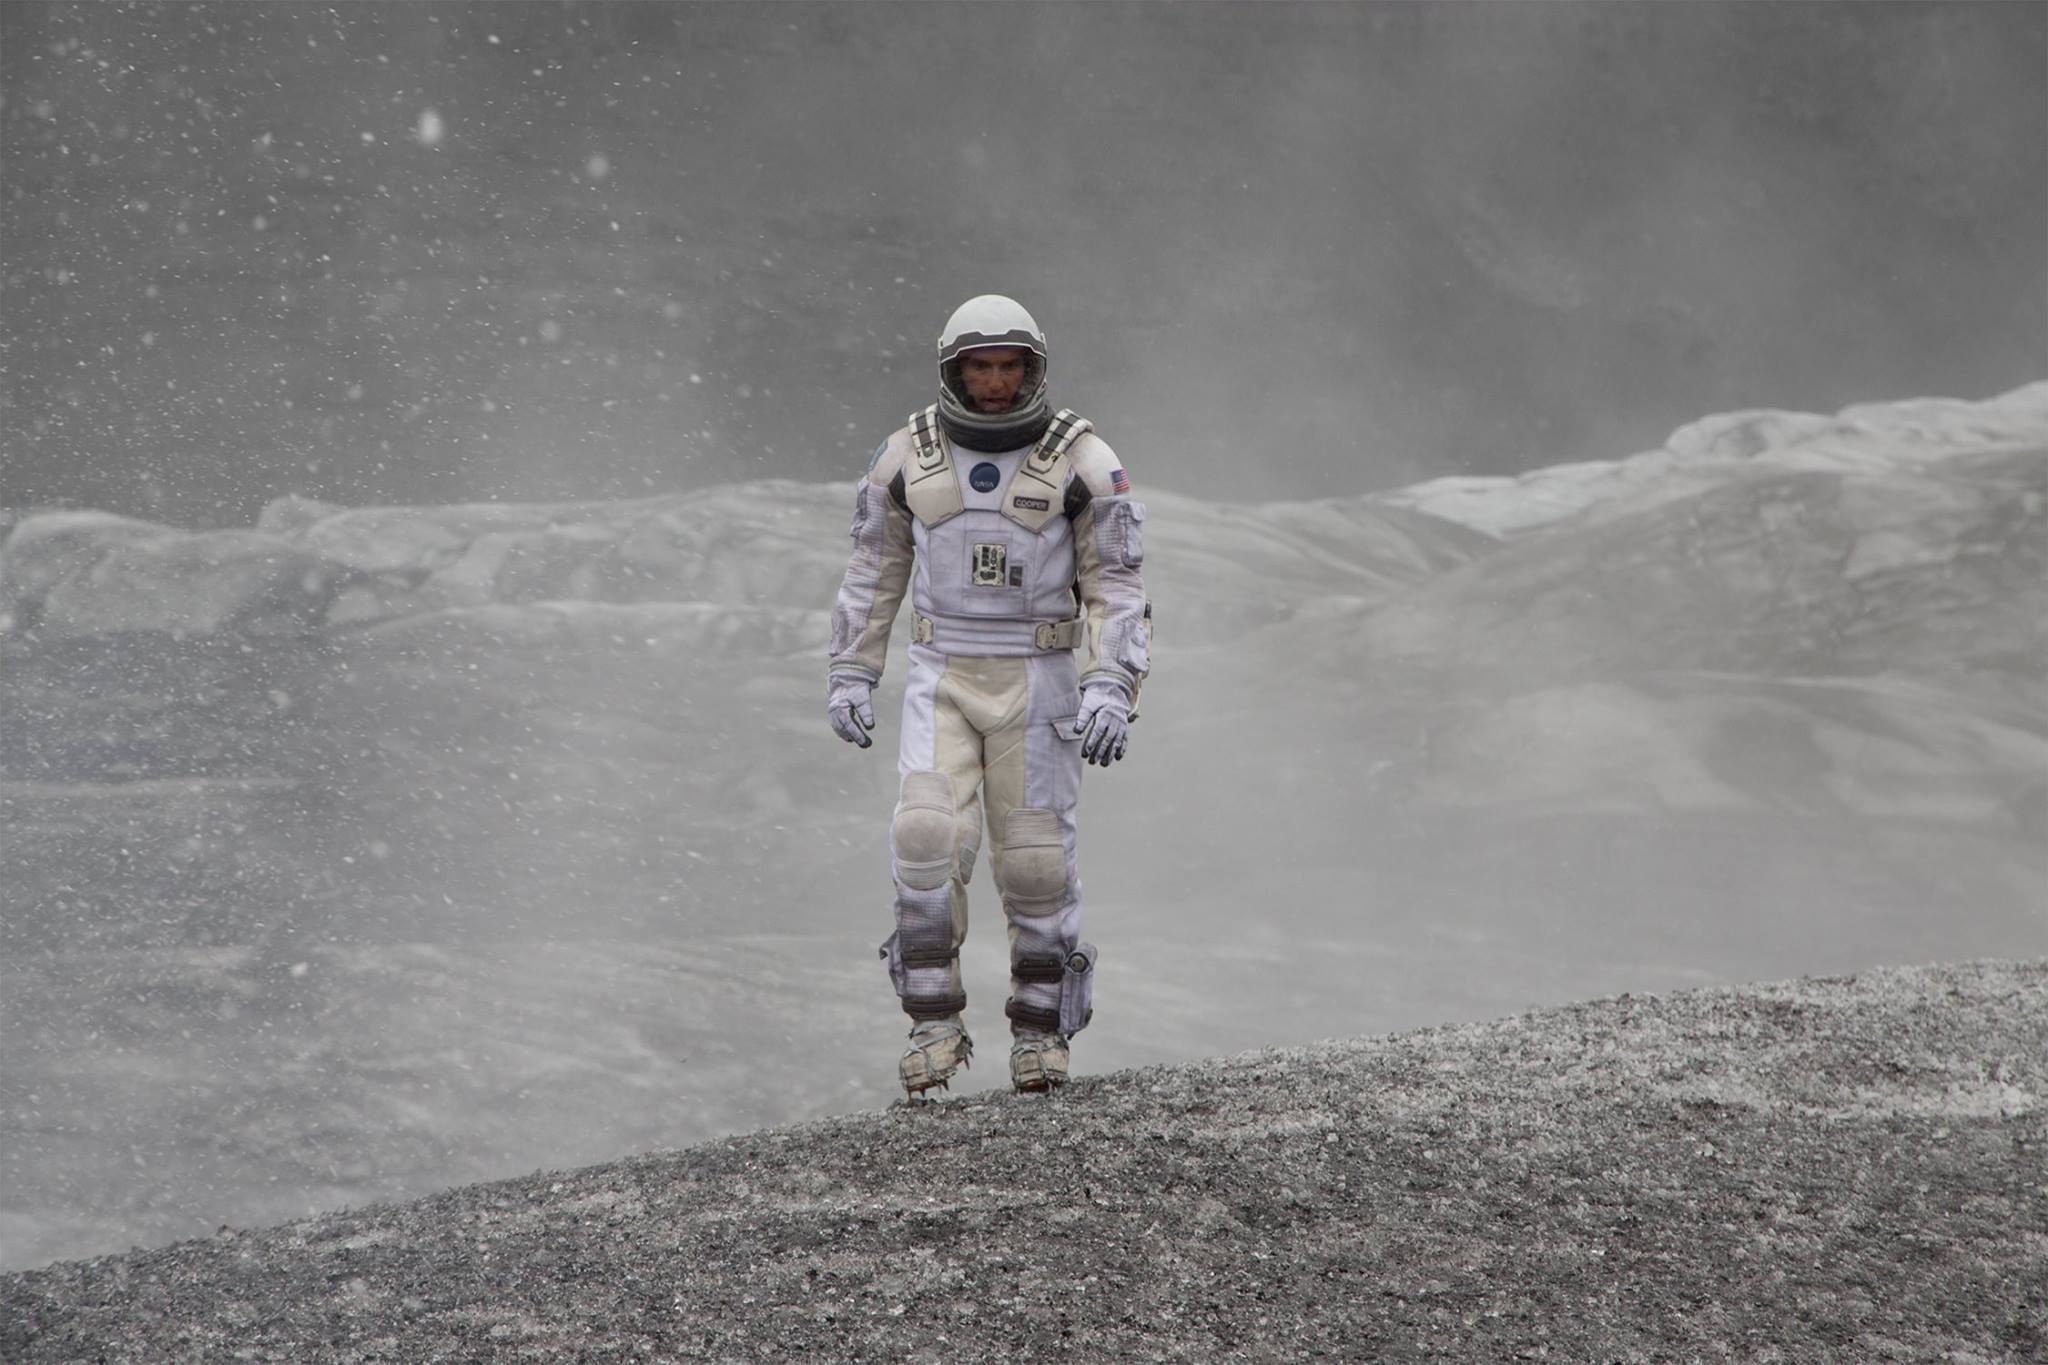 How NASA Could Help Humanity Make 'Interstellar' a Reality Space